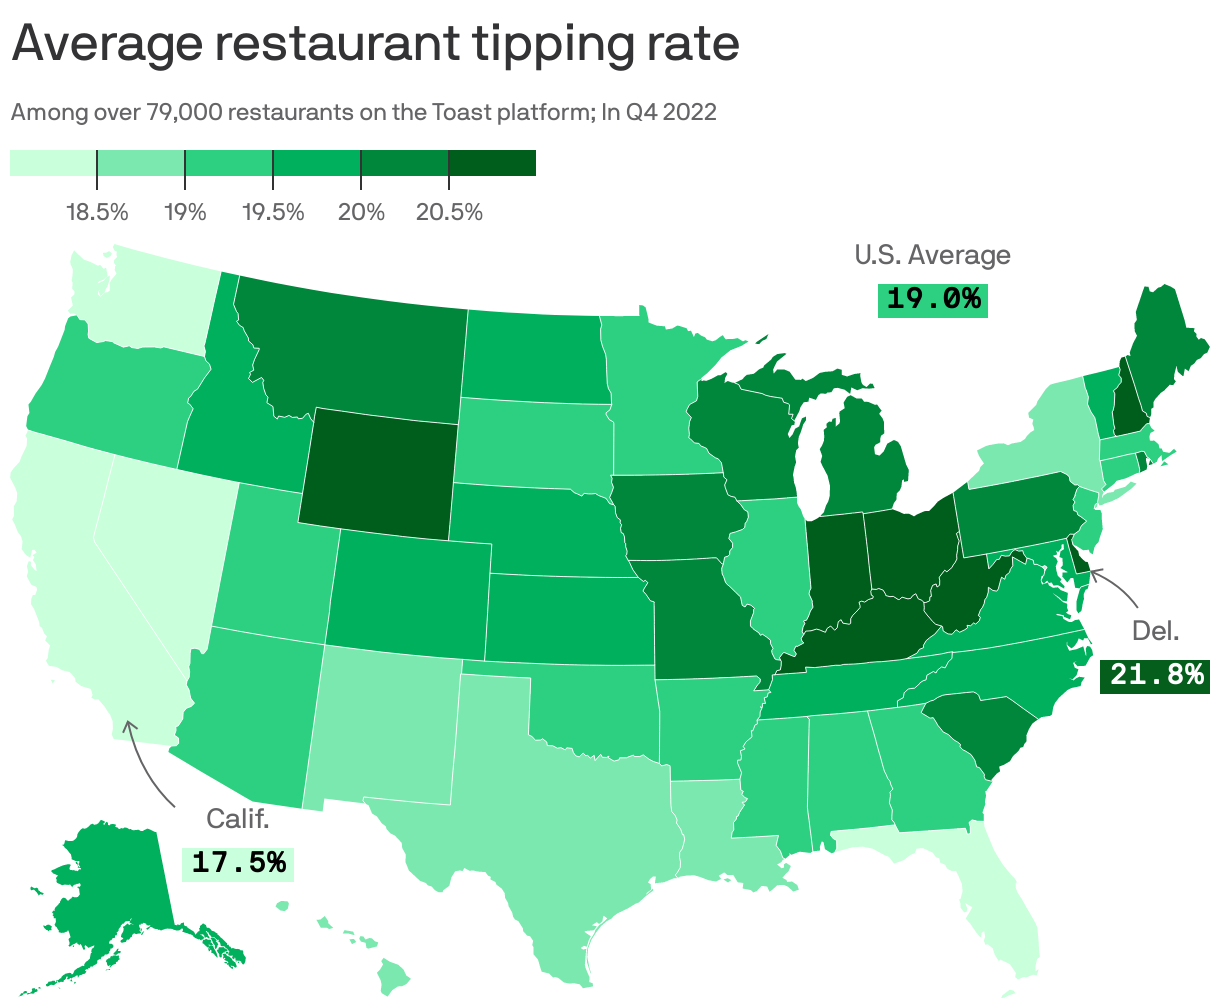 Average restaurant tipping rate